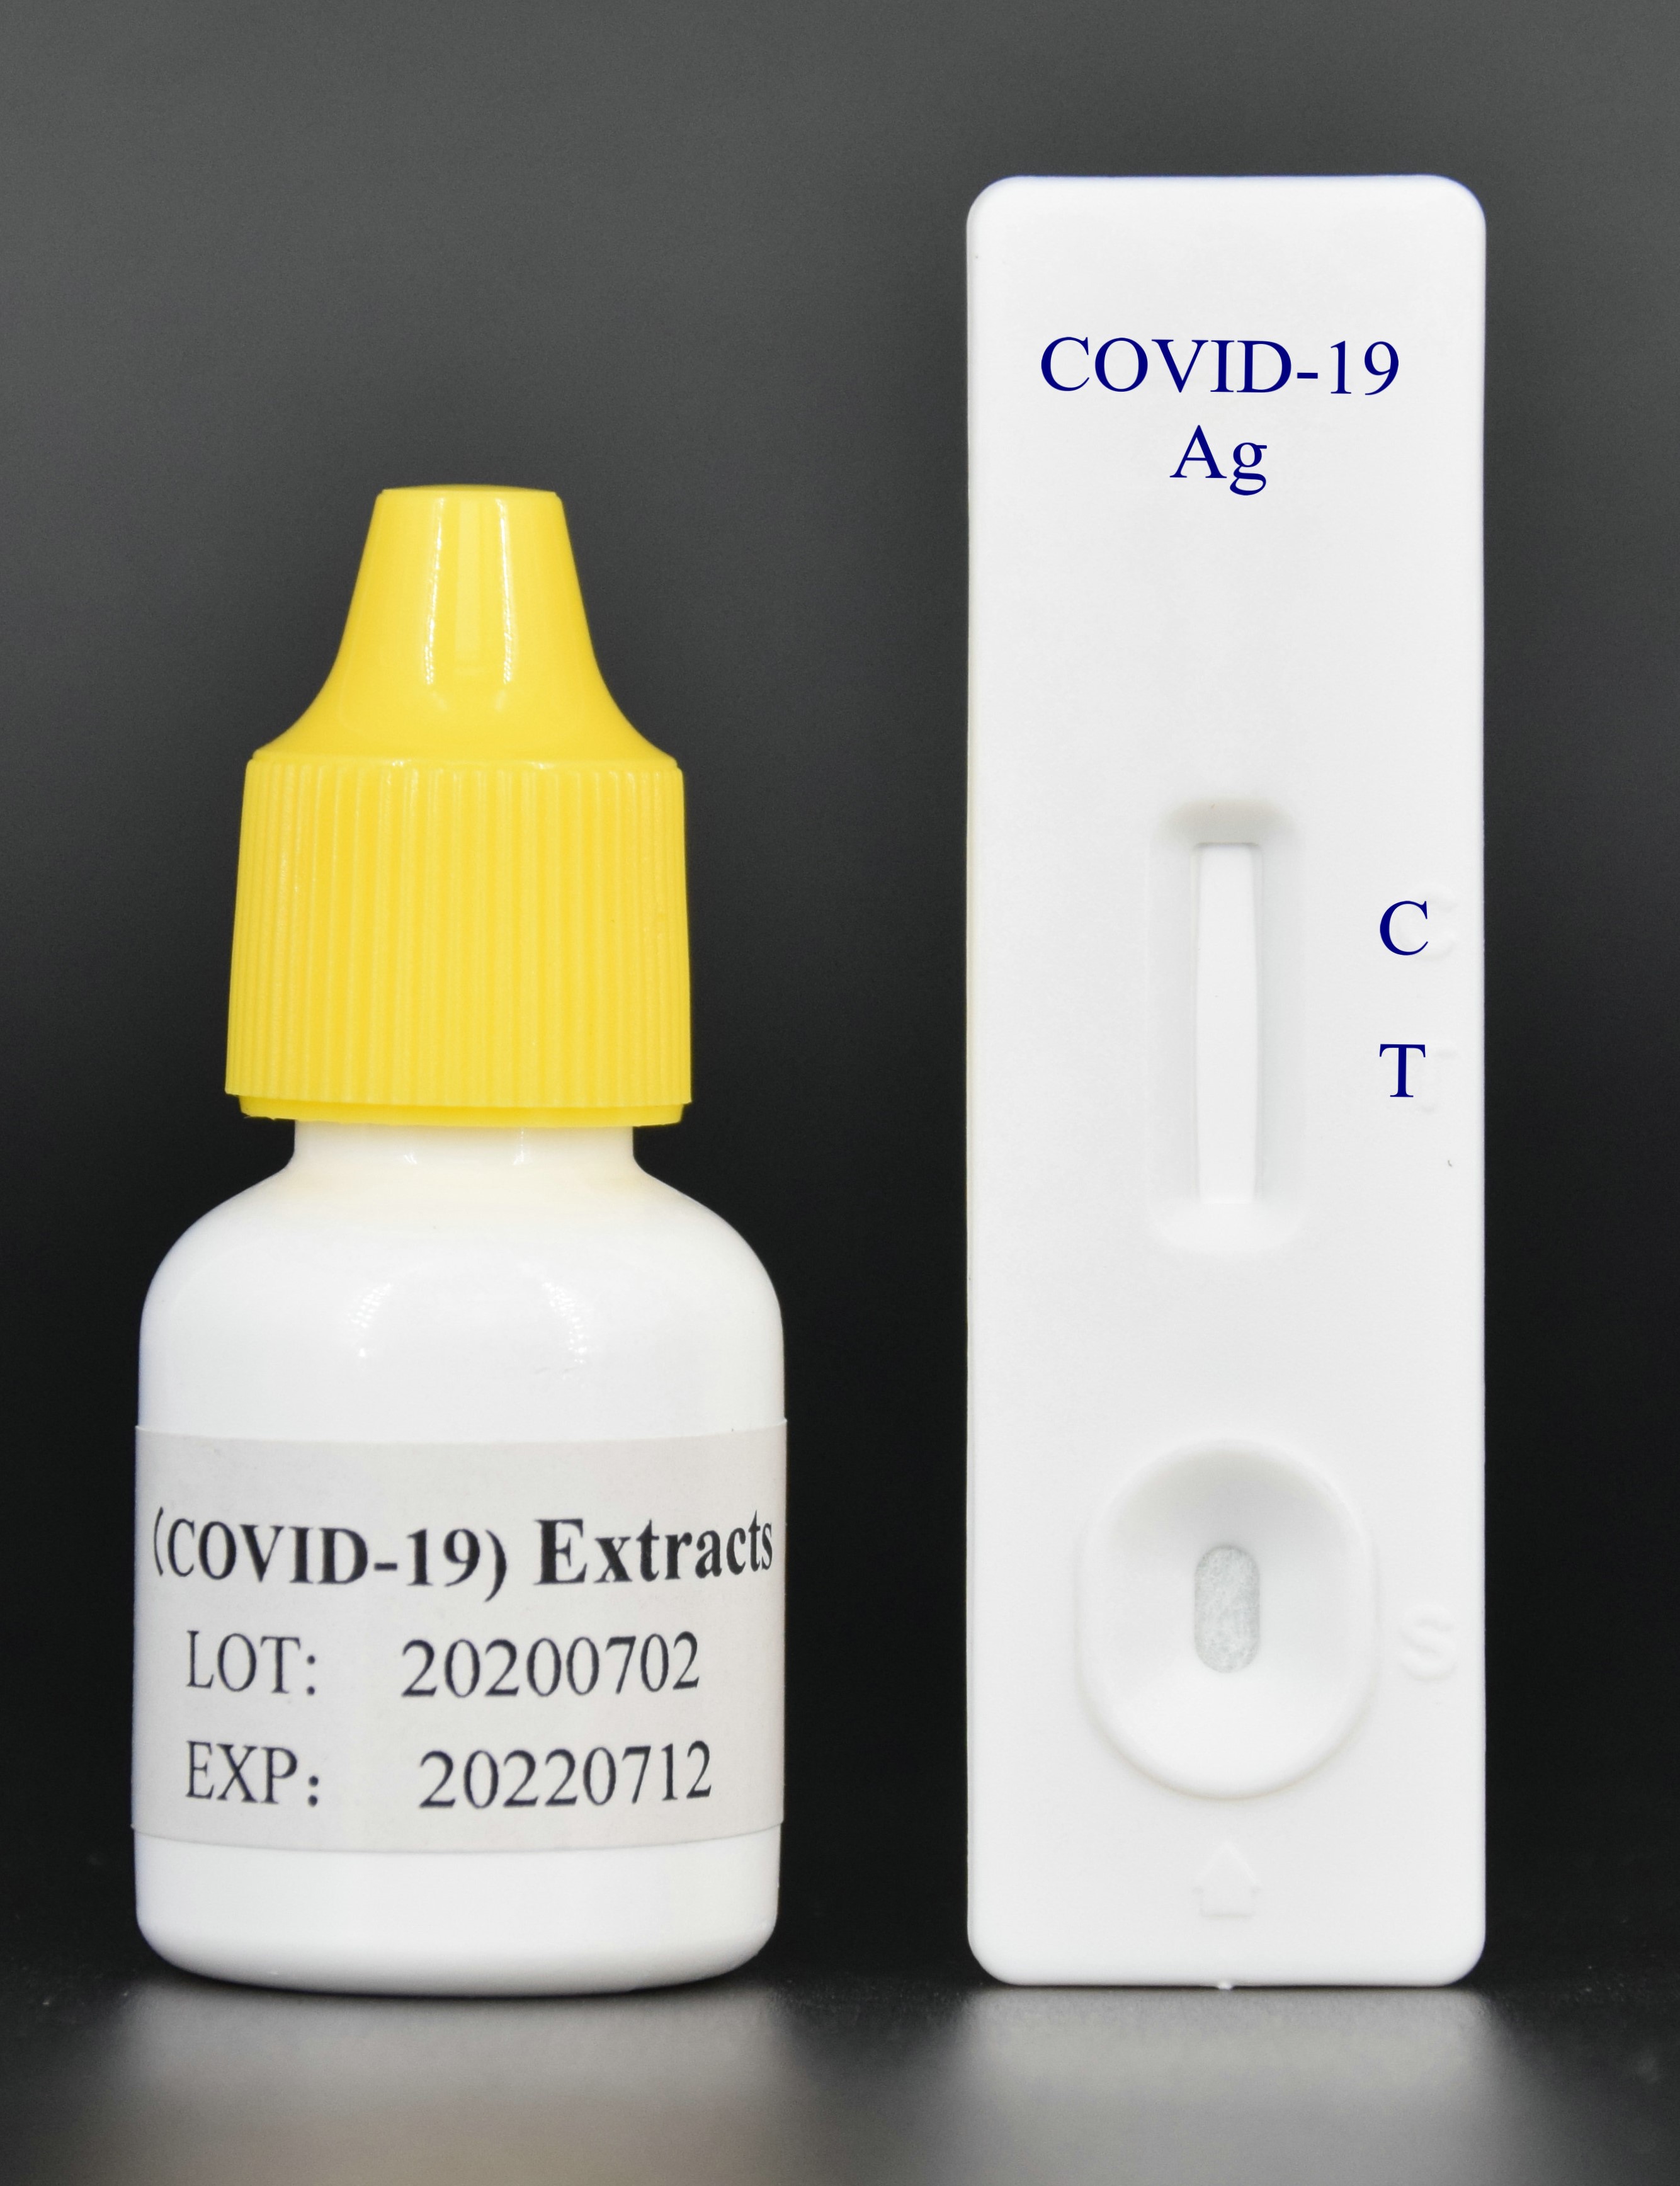 COVID-19 (SARS-CoV-2) Antigen Test Kit manufacturer and supply from China 